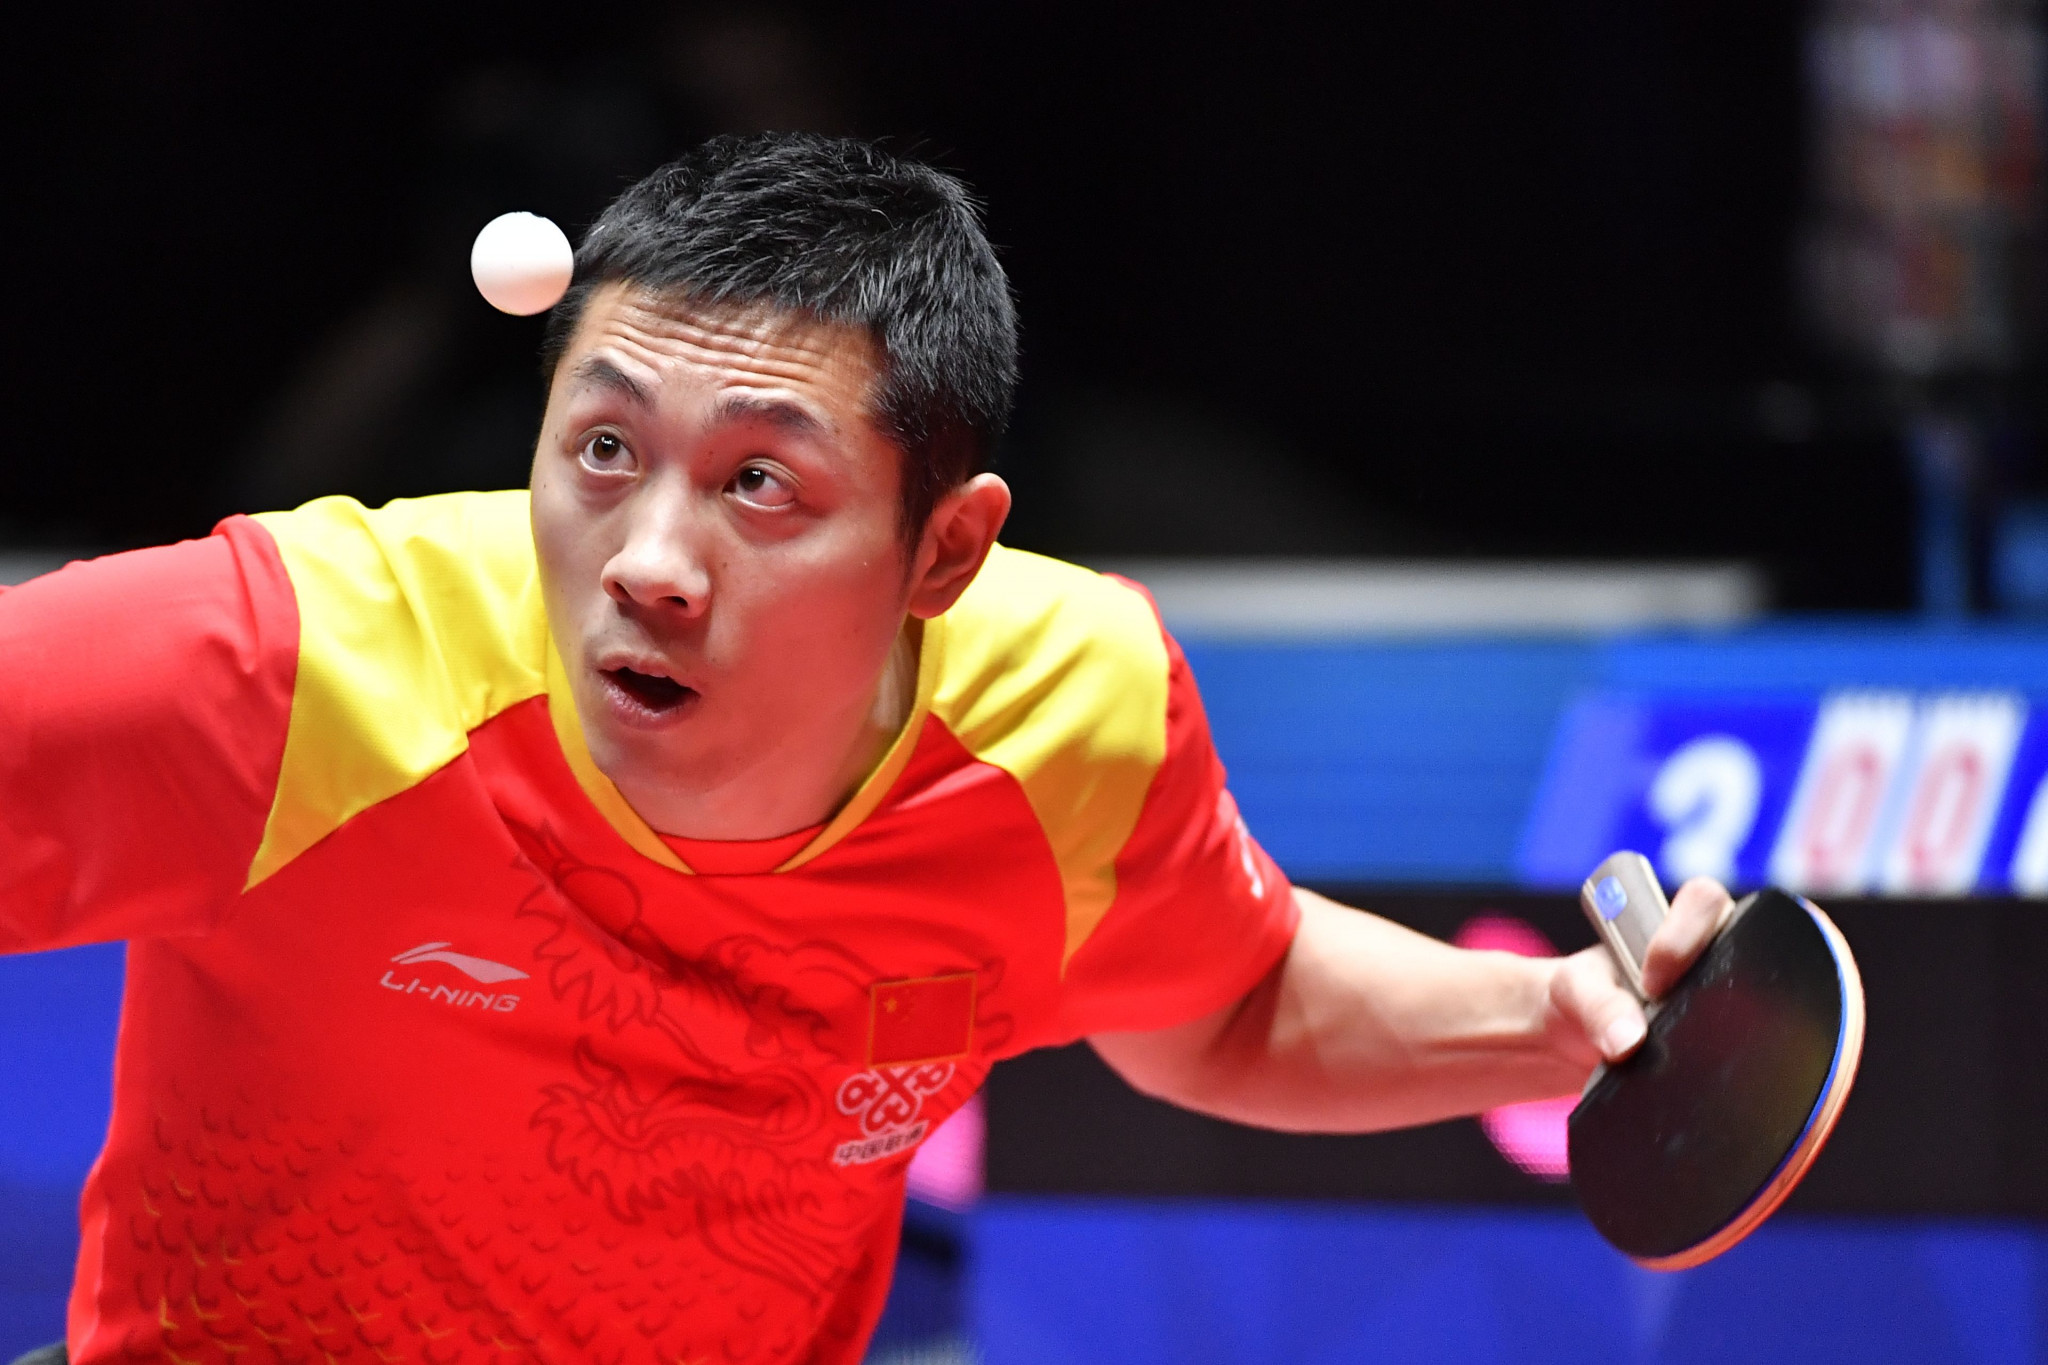 Tickets go on sale for 2019 ITTF World Championships